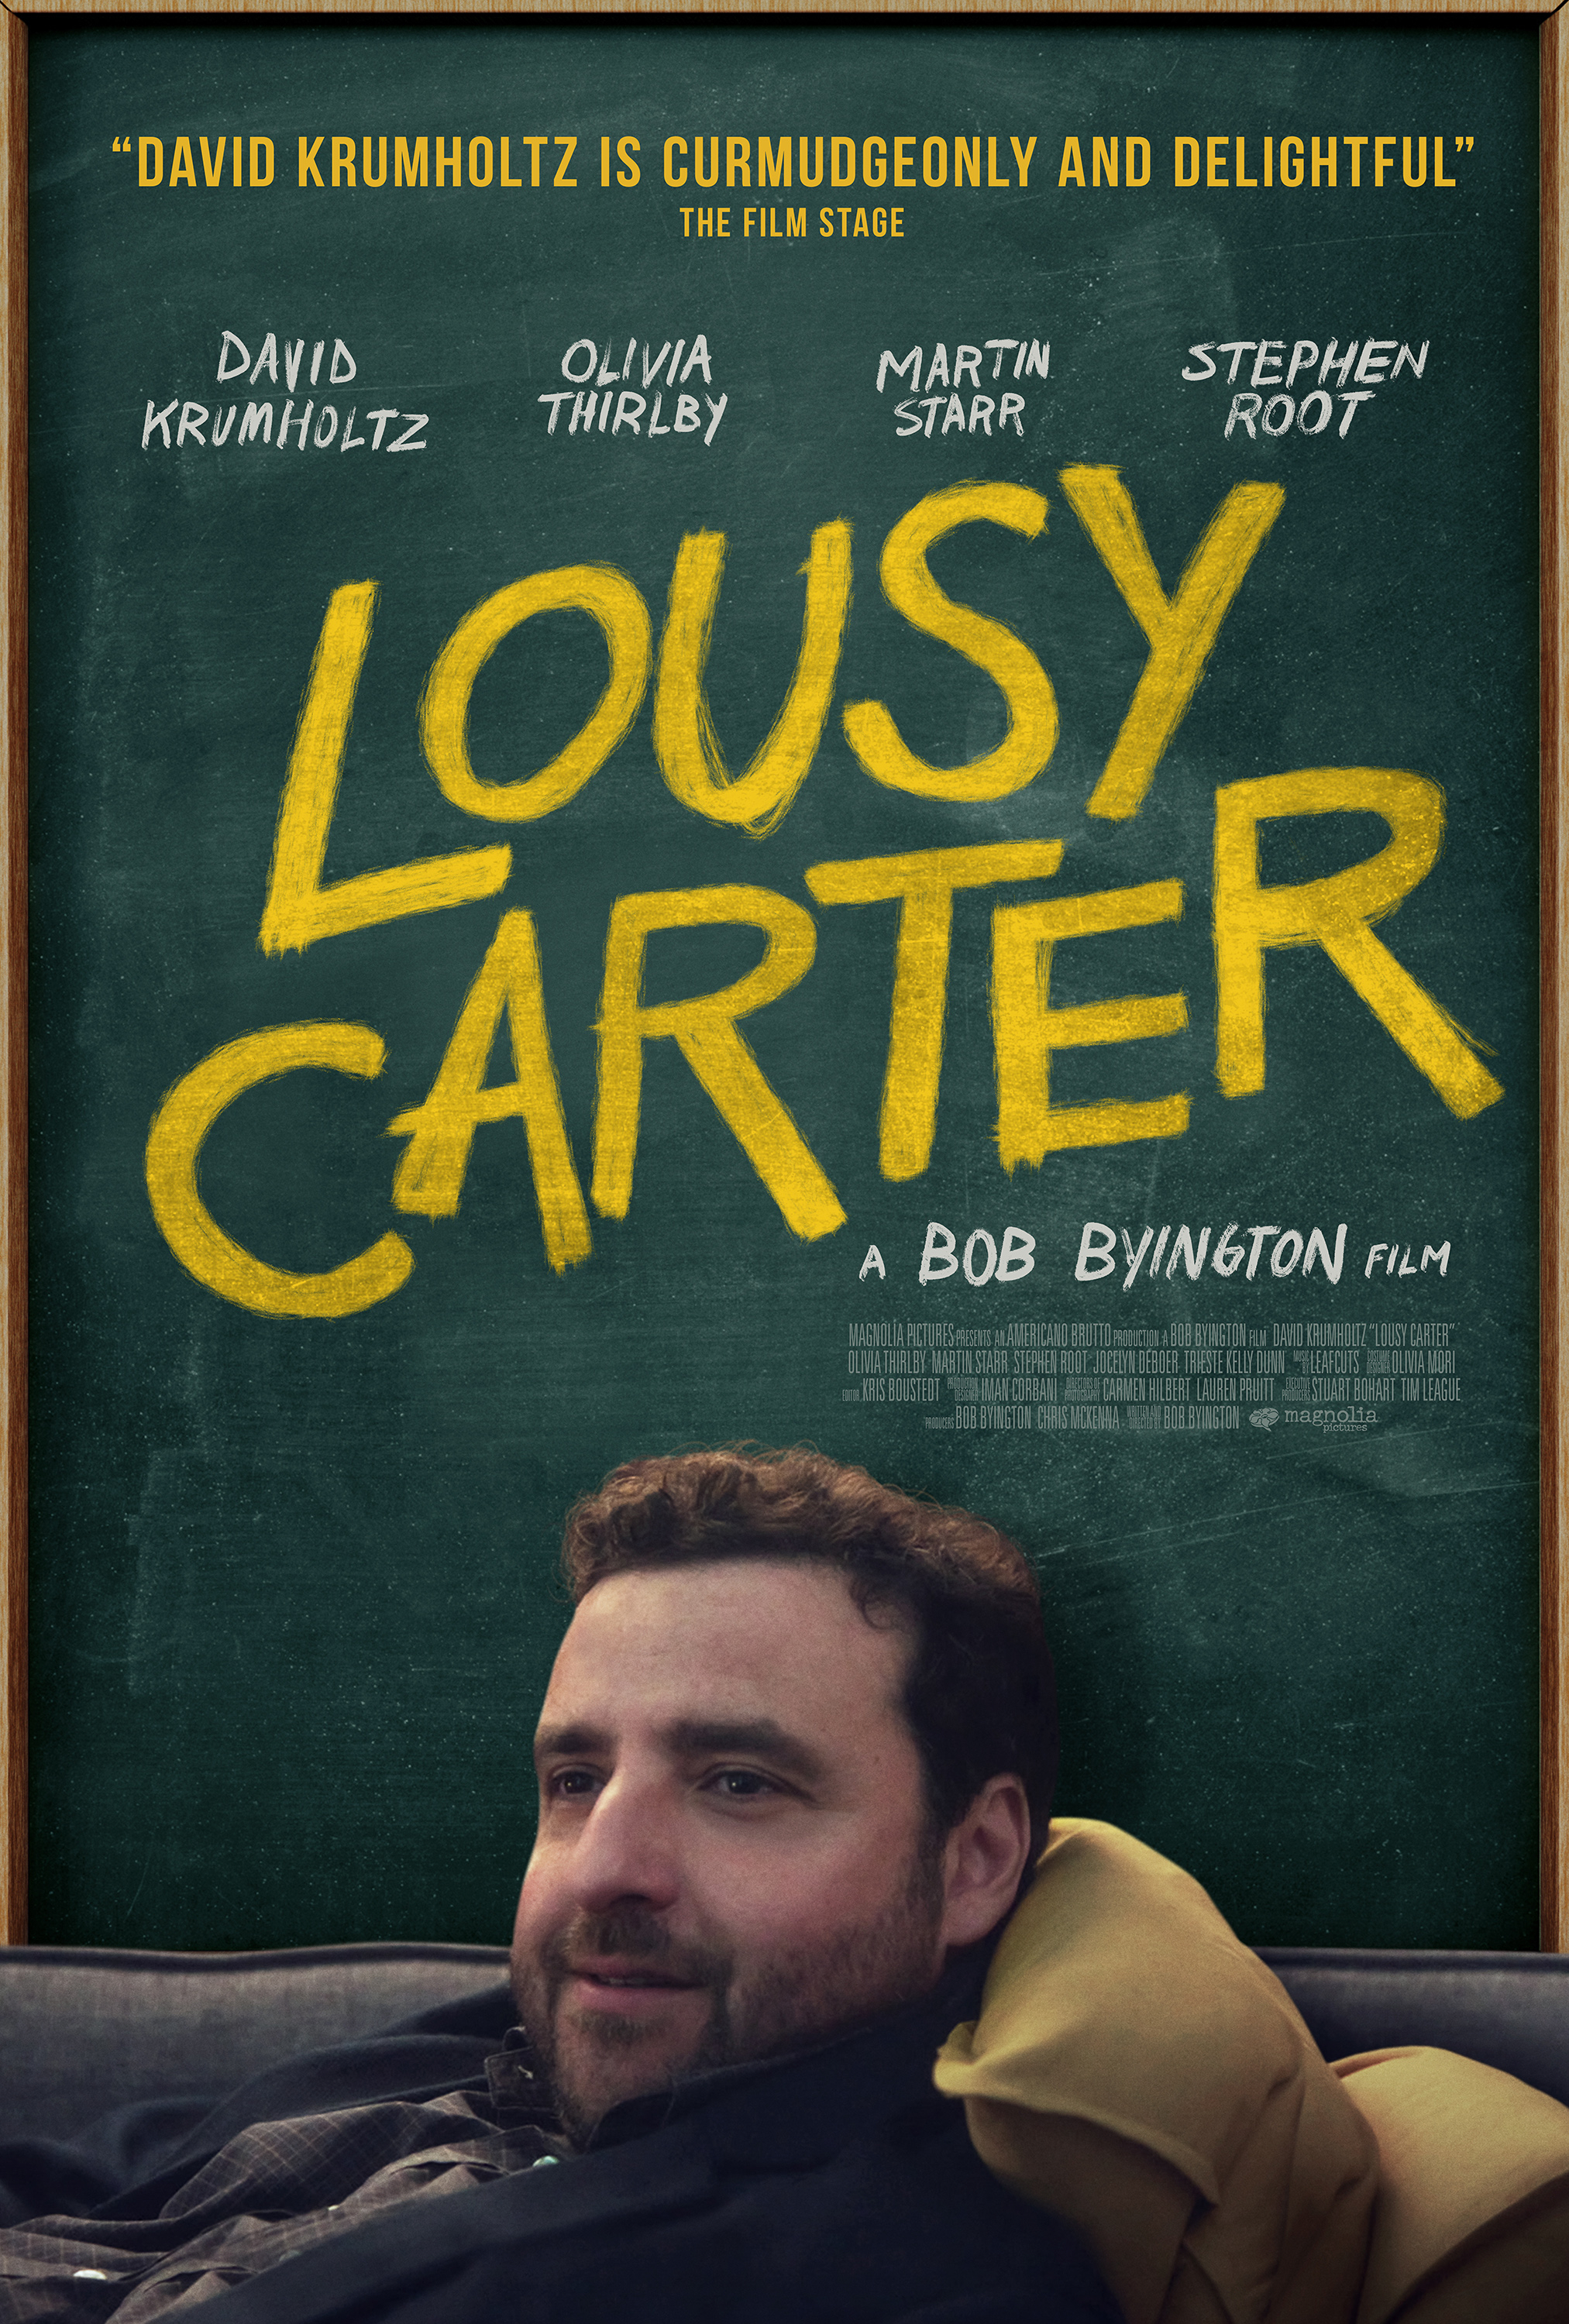 Movie poster for &quot;Lousy Carter&quot; featuring David Krumholtz reclining with text of cast and praise above